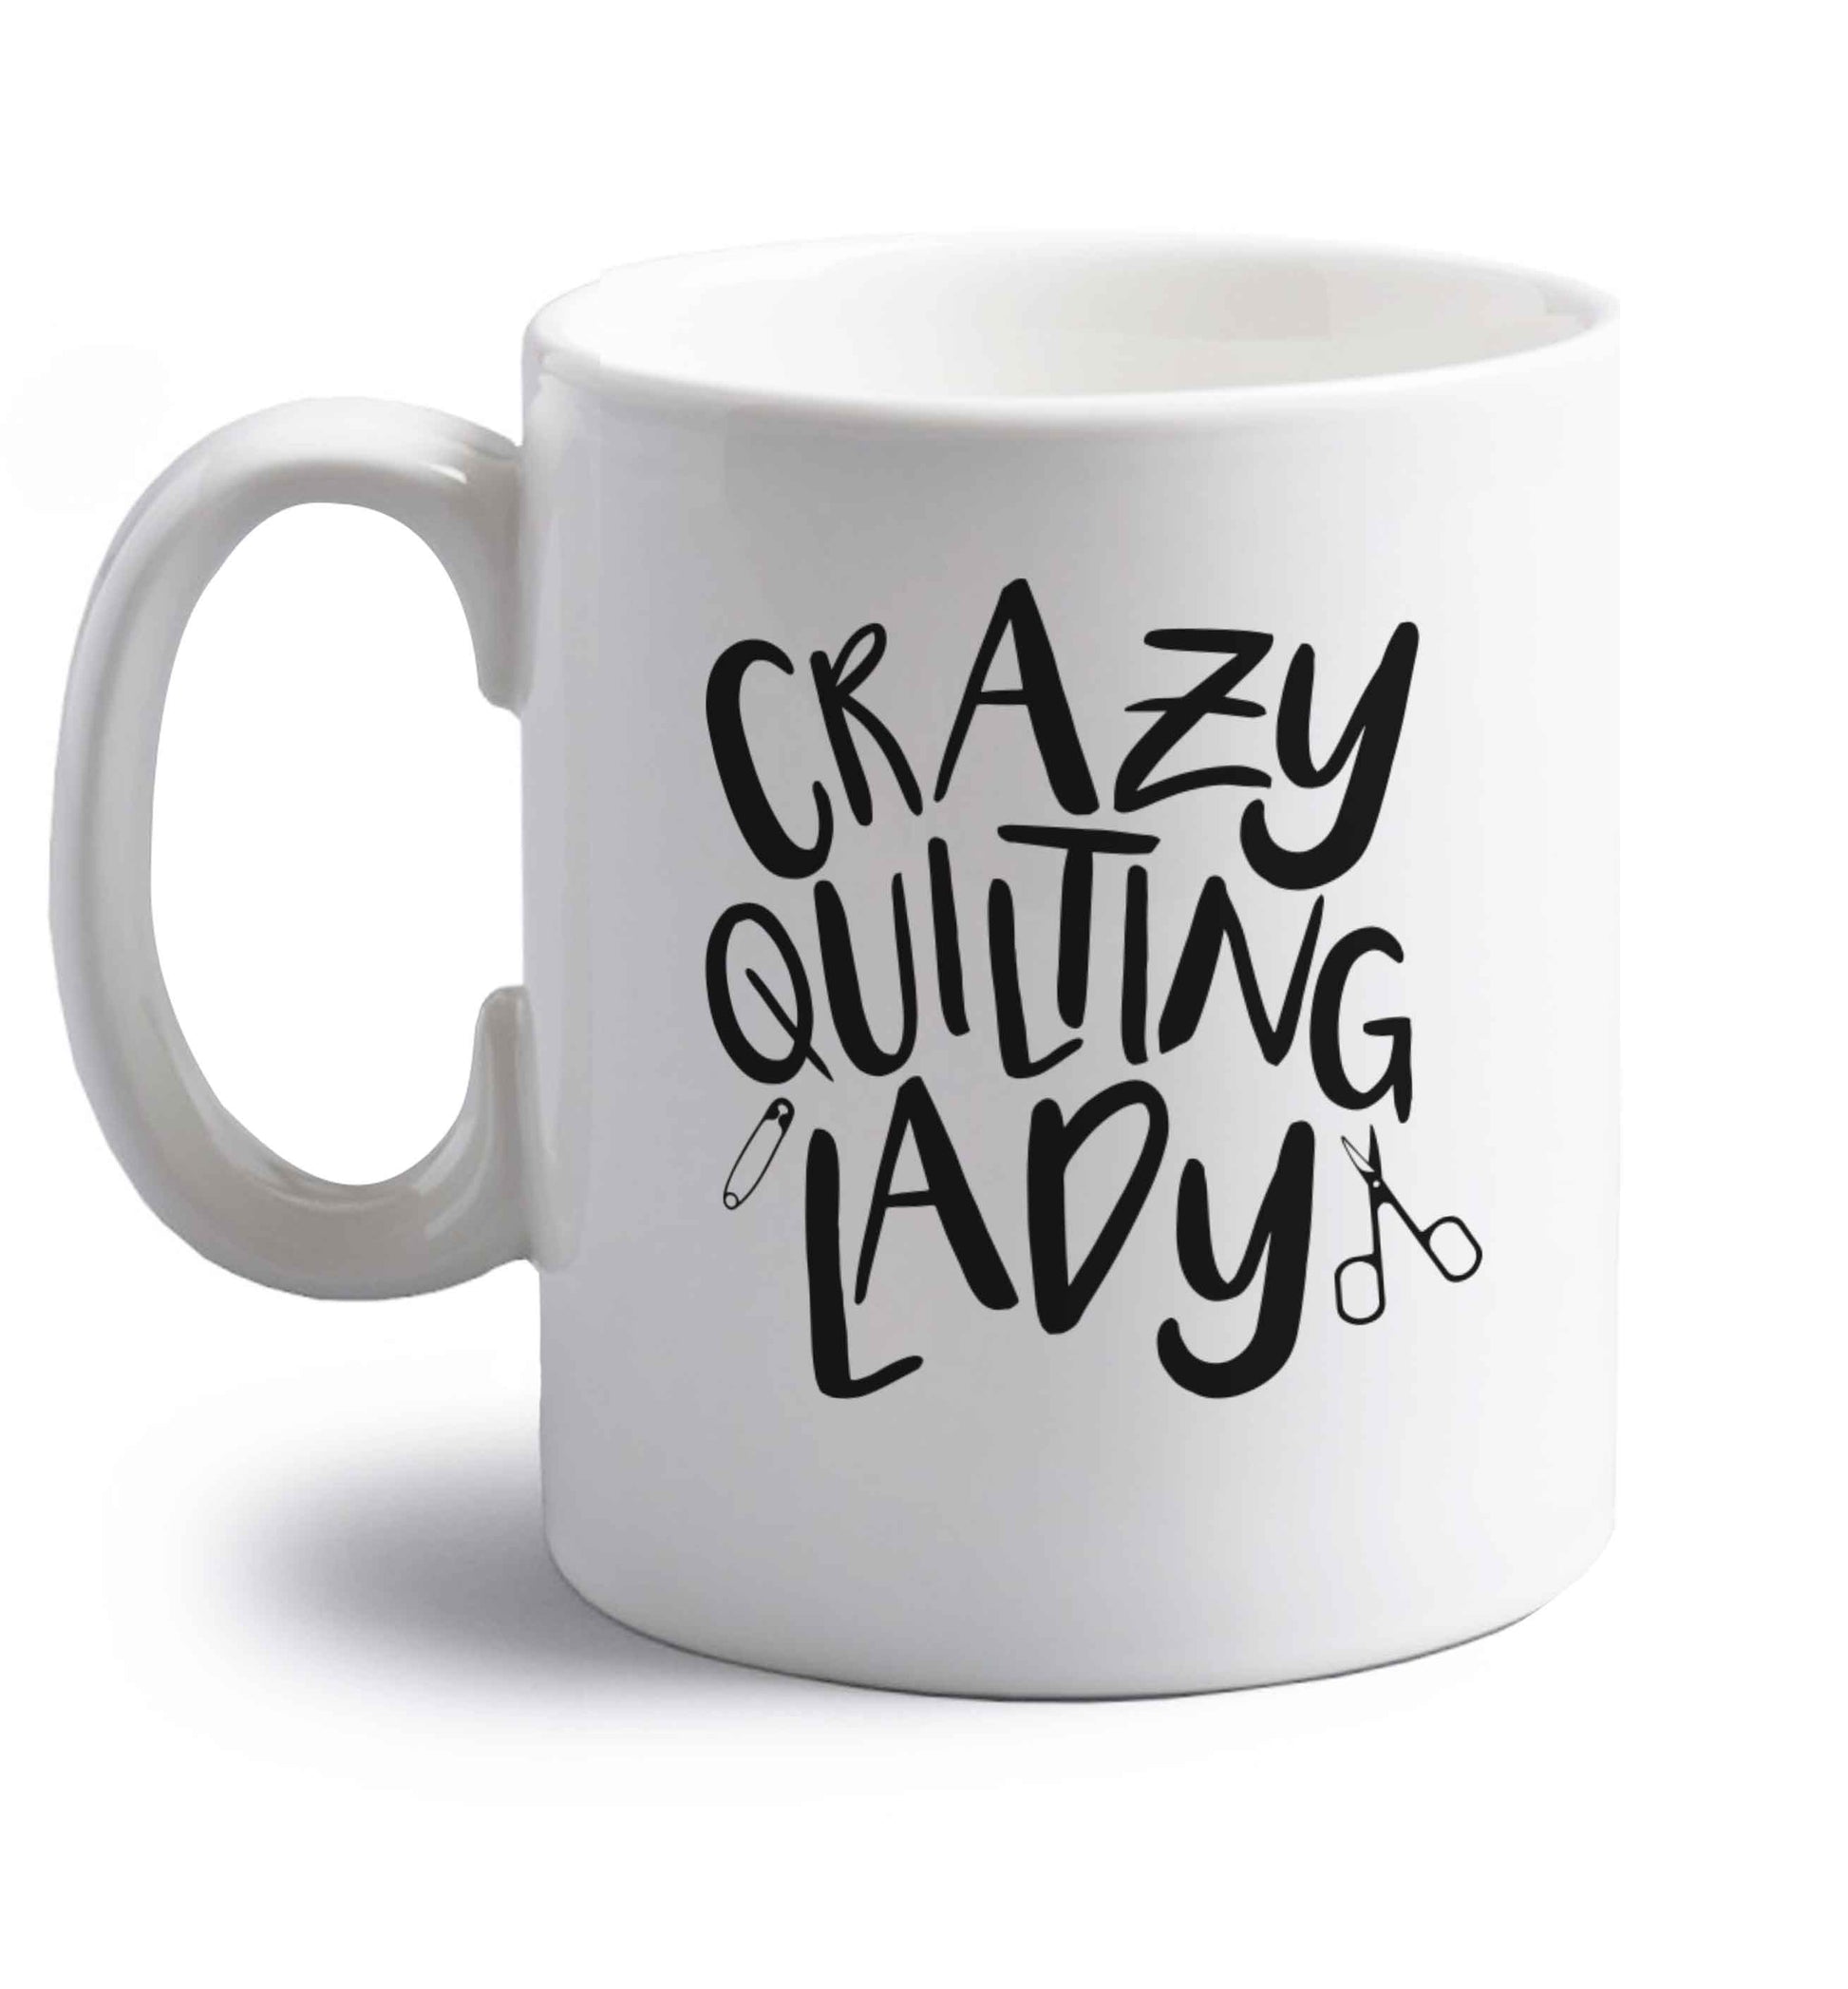 Crazy quilting lady right handed white ceramic mug 